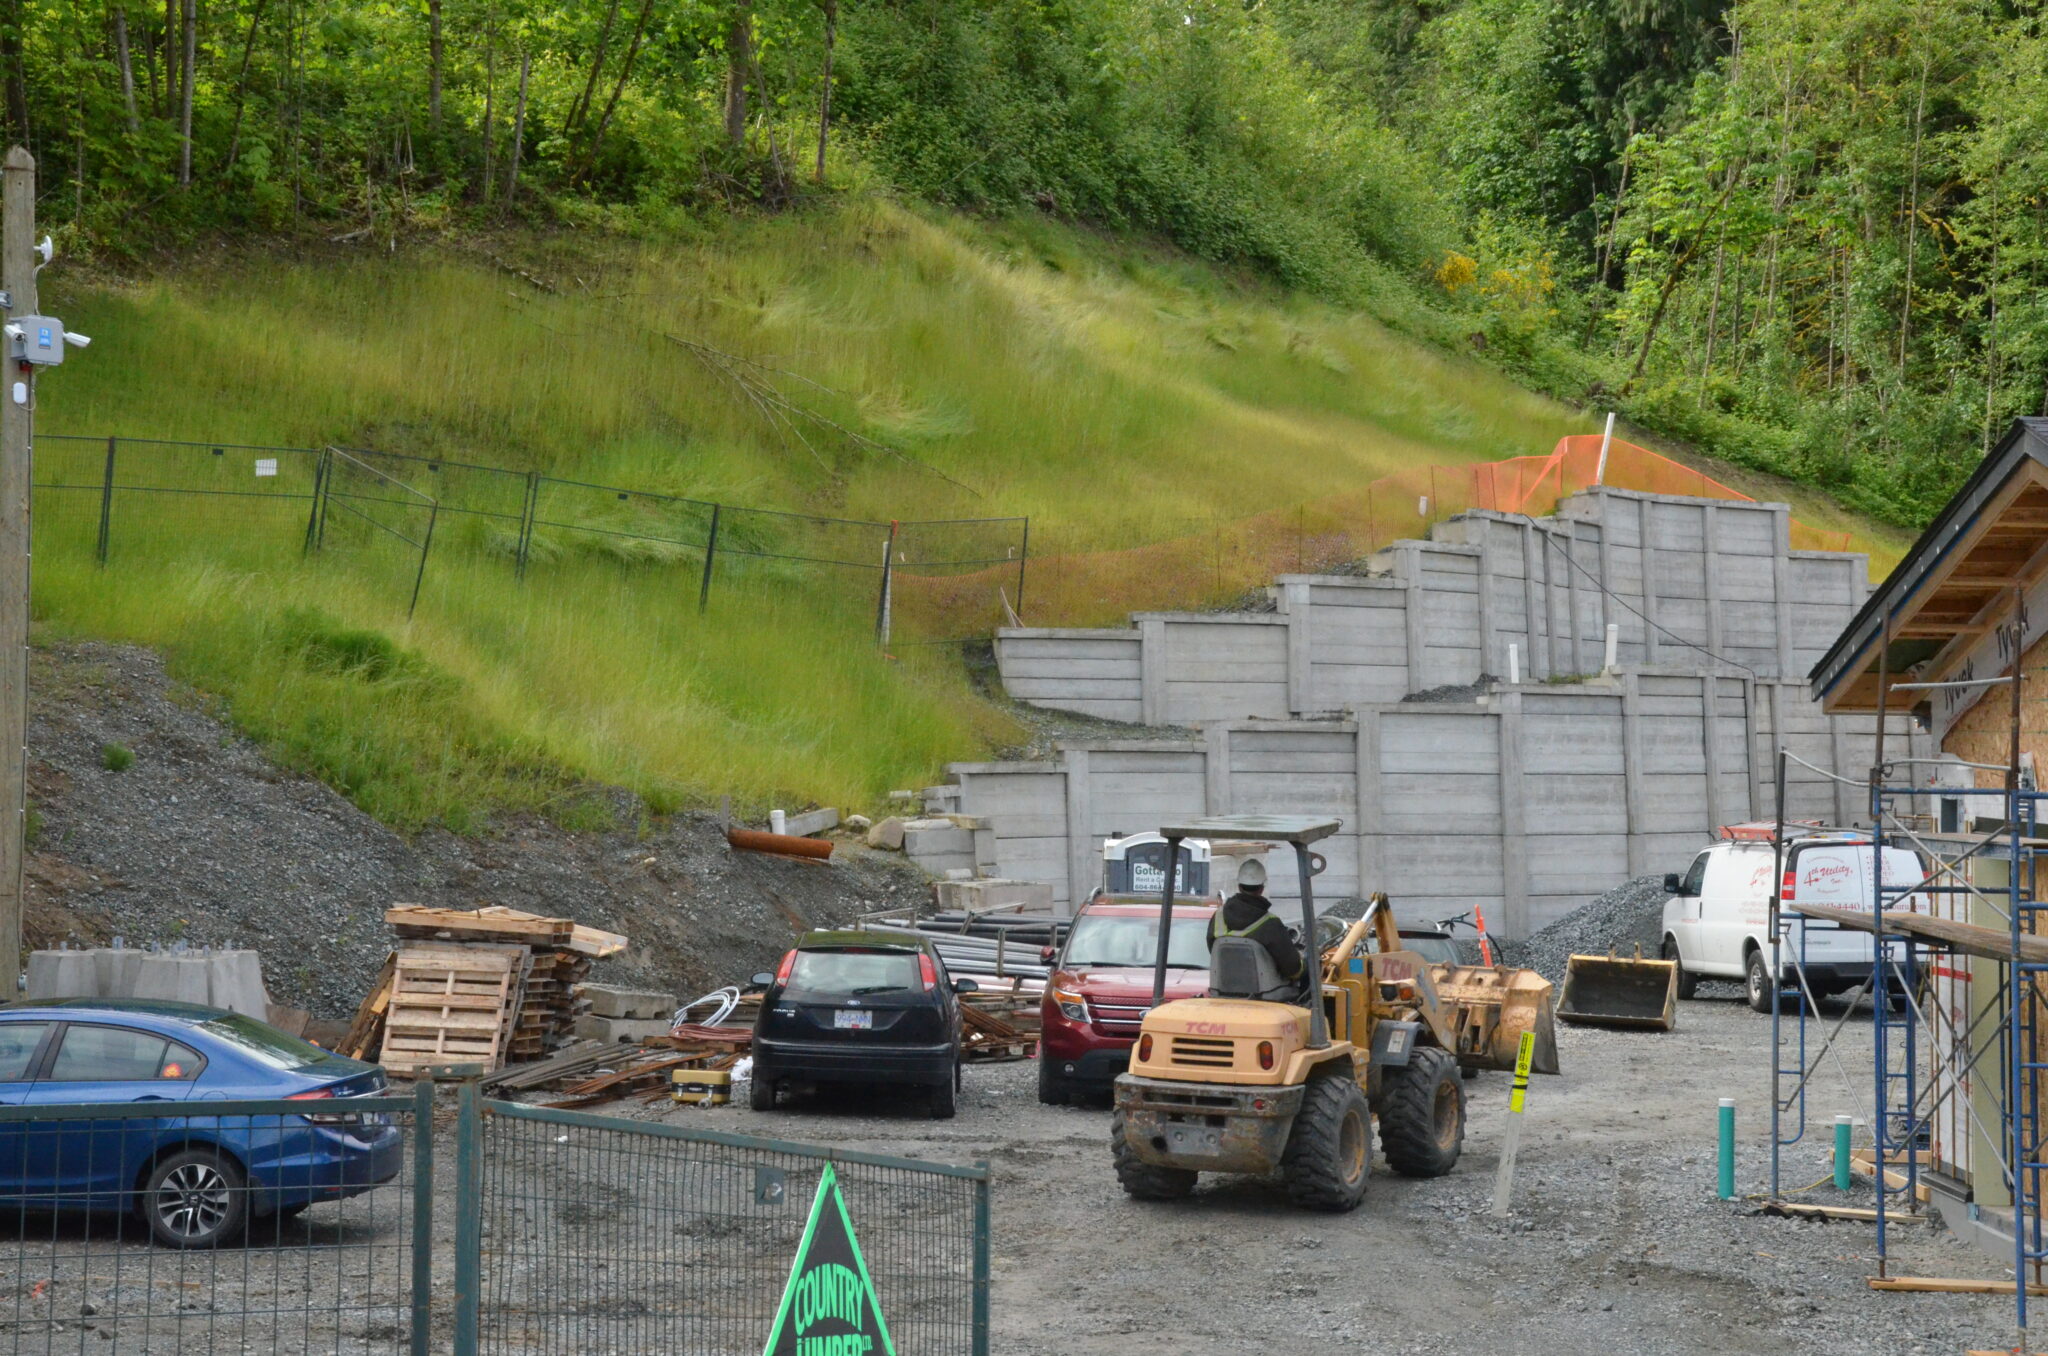 Slope Stabilization and Retaining Wall Construction At The Rear Of A Private Business